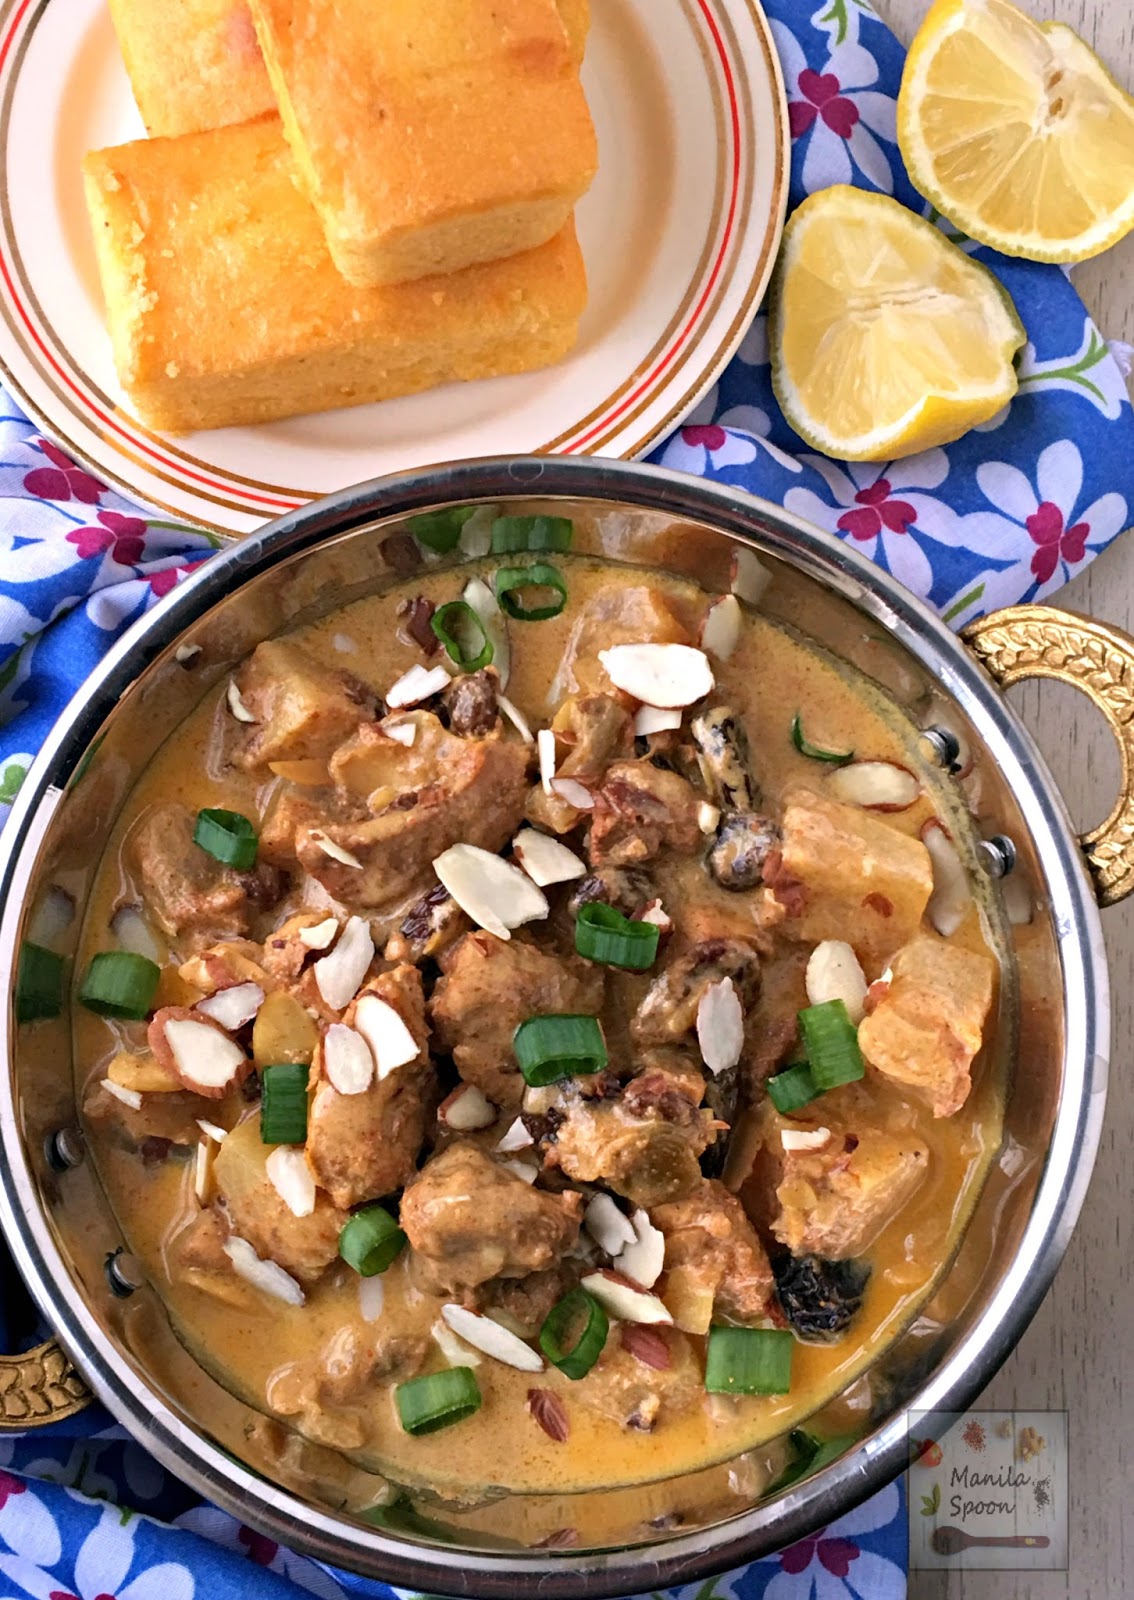 Mild and fruity chicken curry with the perfect blend of sweet and spicy flavors! Quick and easy to make it's ready in 30 minutes!